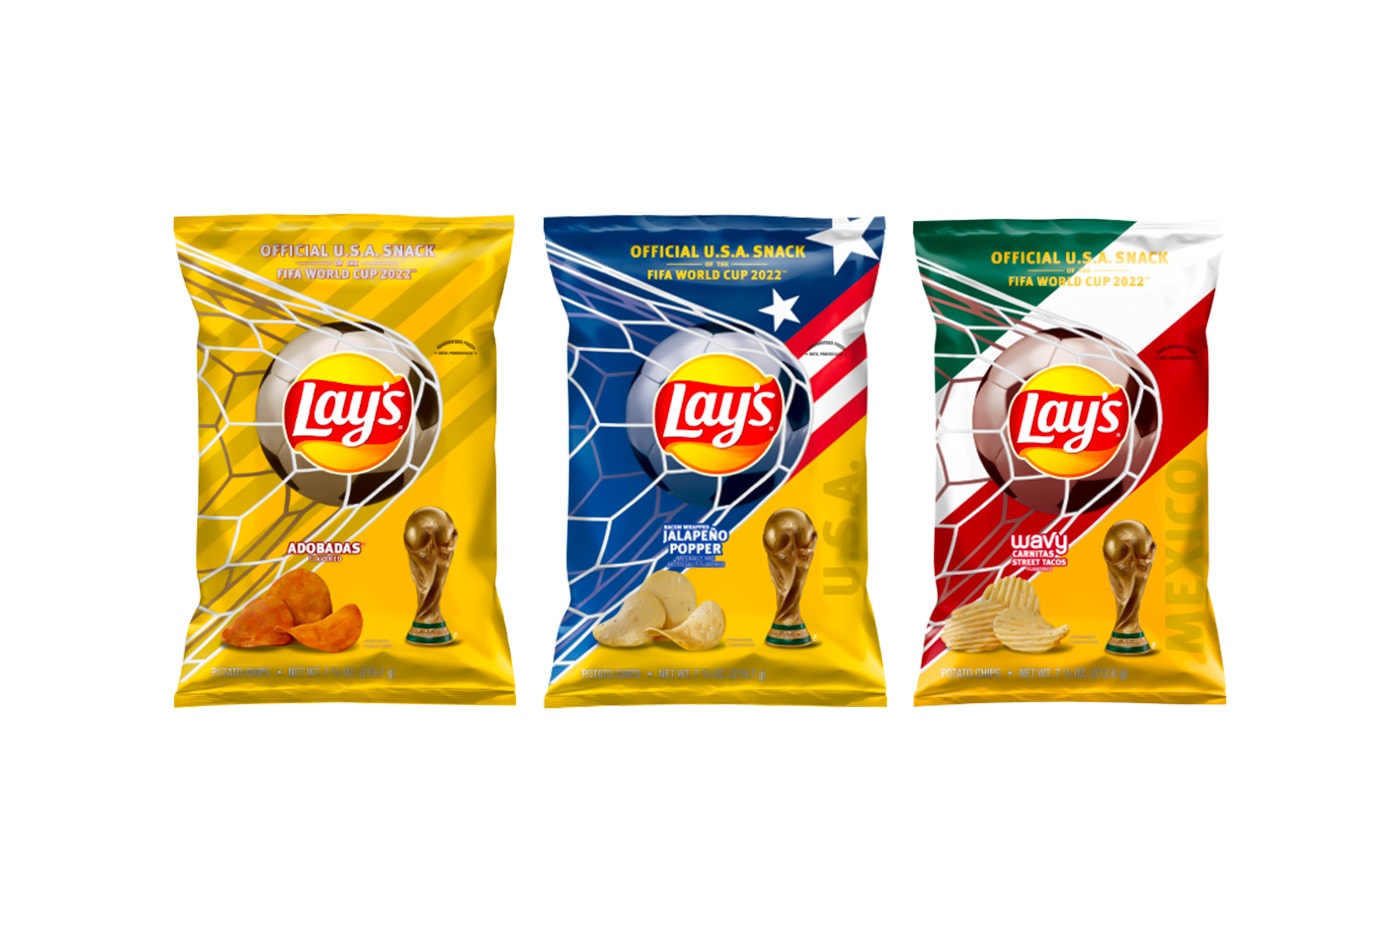 frito lay fifa world cup 2022 new flavors adobadas wavy carnitas street tacos jalapeno popper release info 7.75 oz bags 